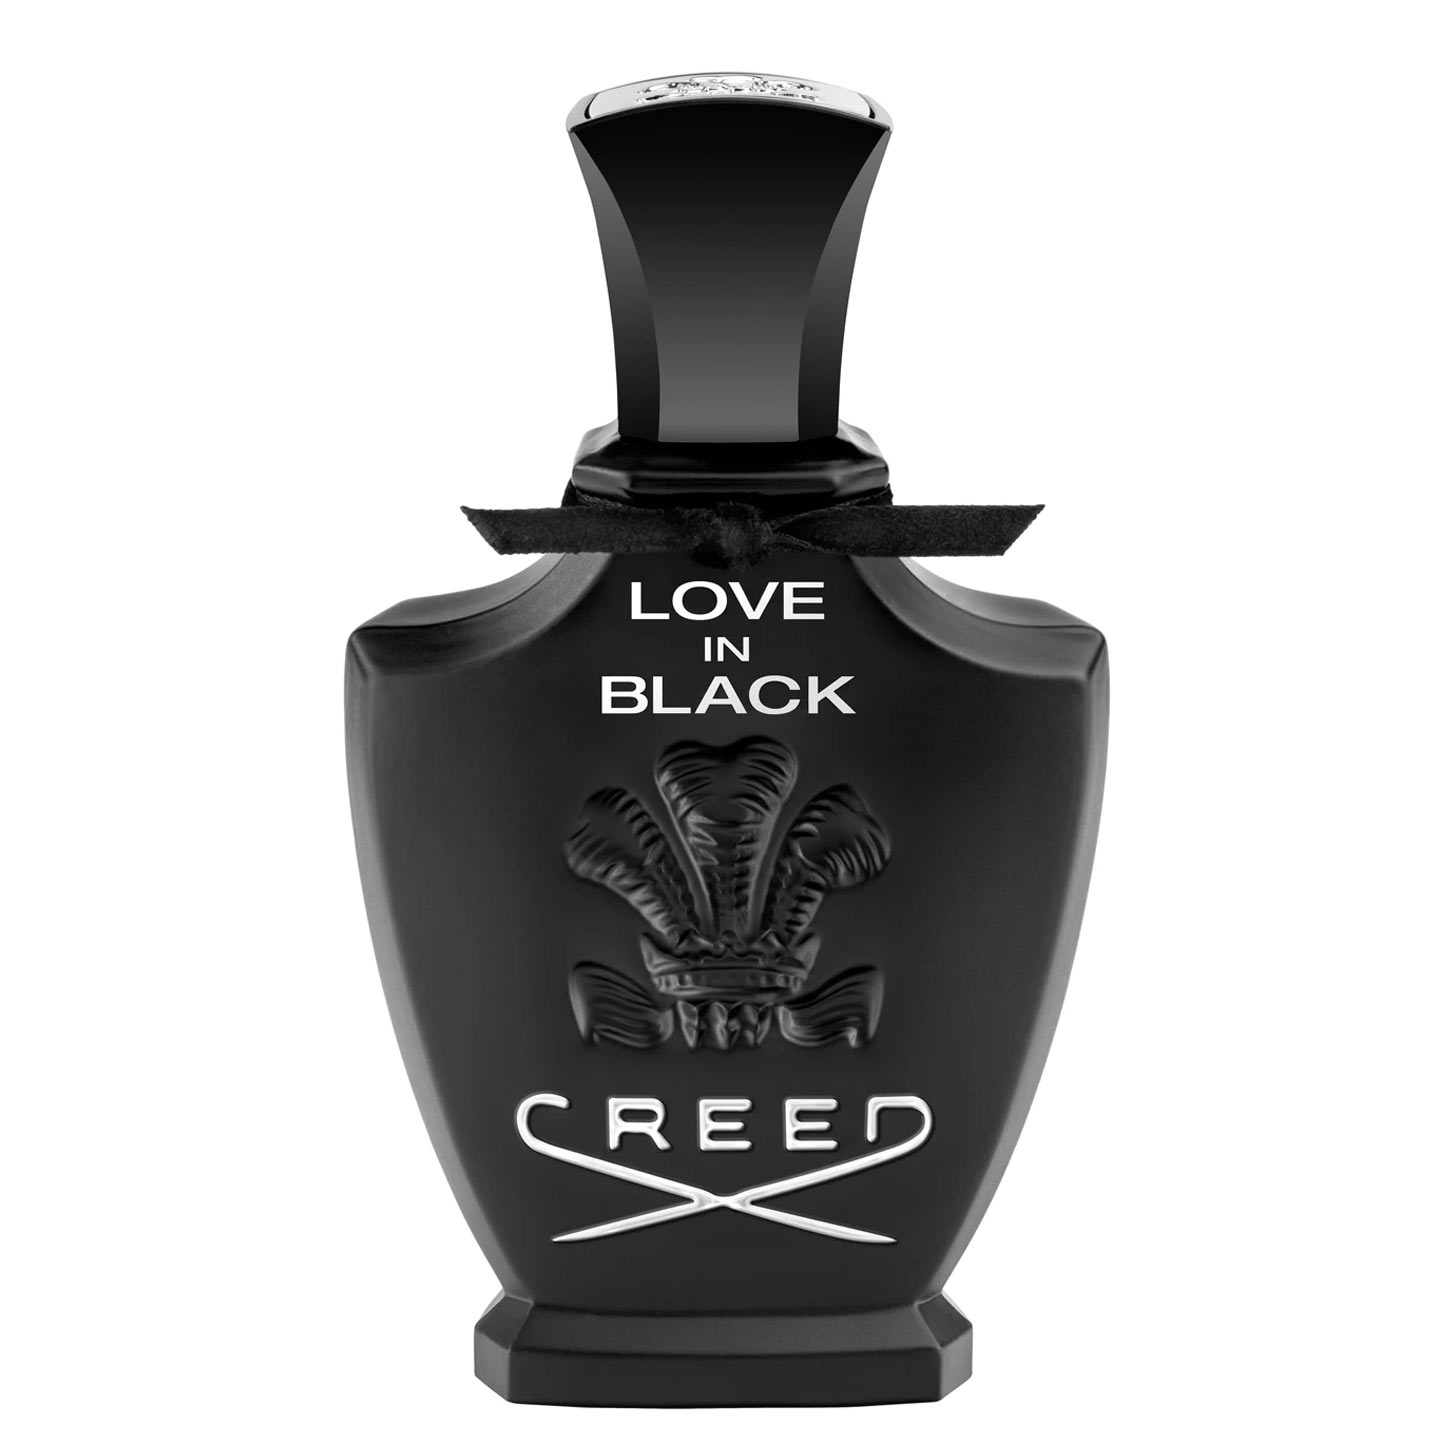 Creed-Love-In-Black-Creed